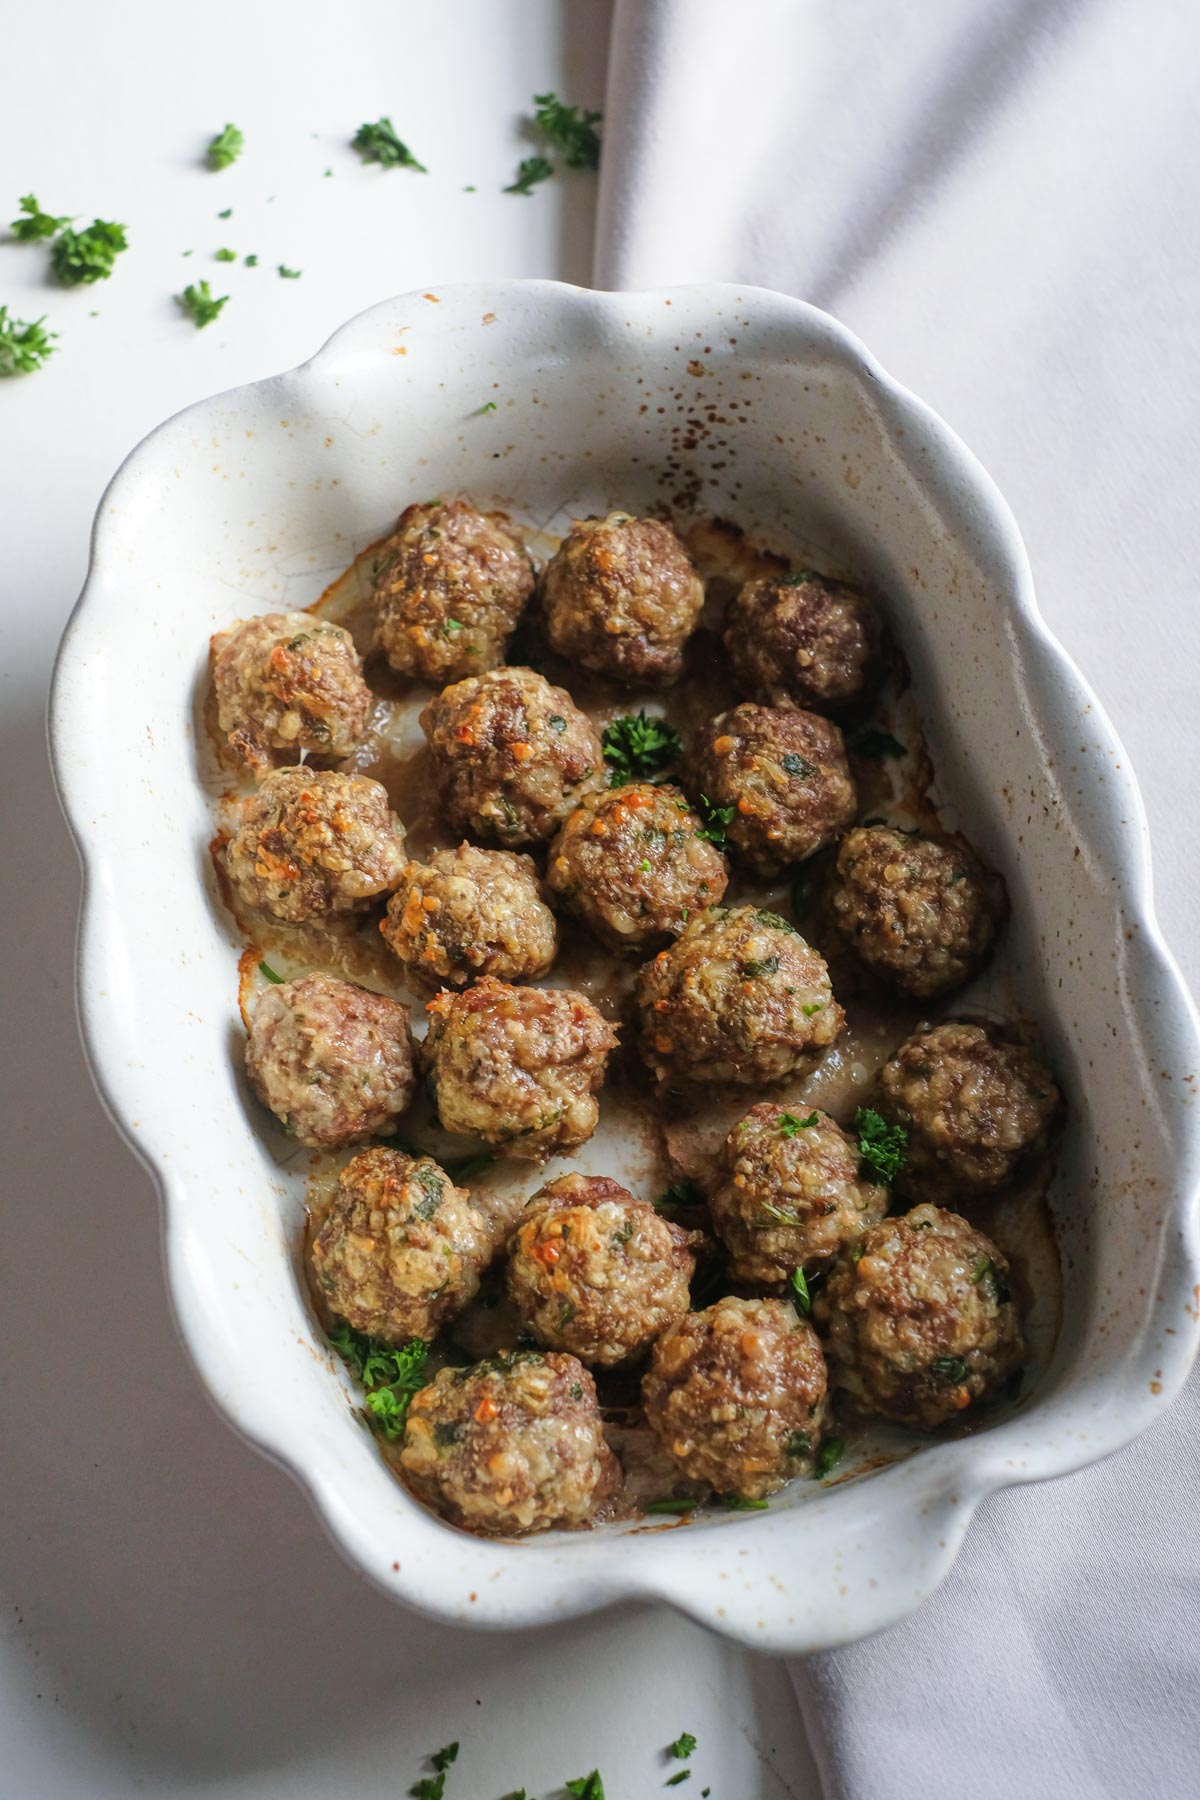 How To Bake Meatballs In The Oven